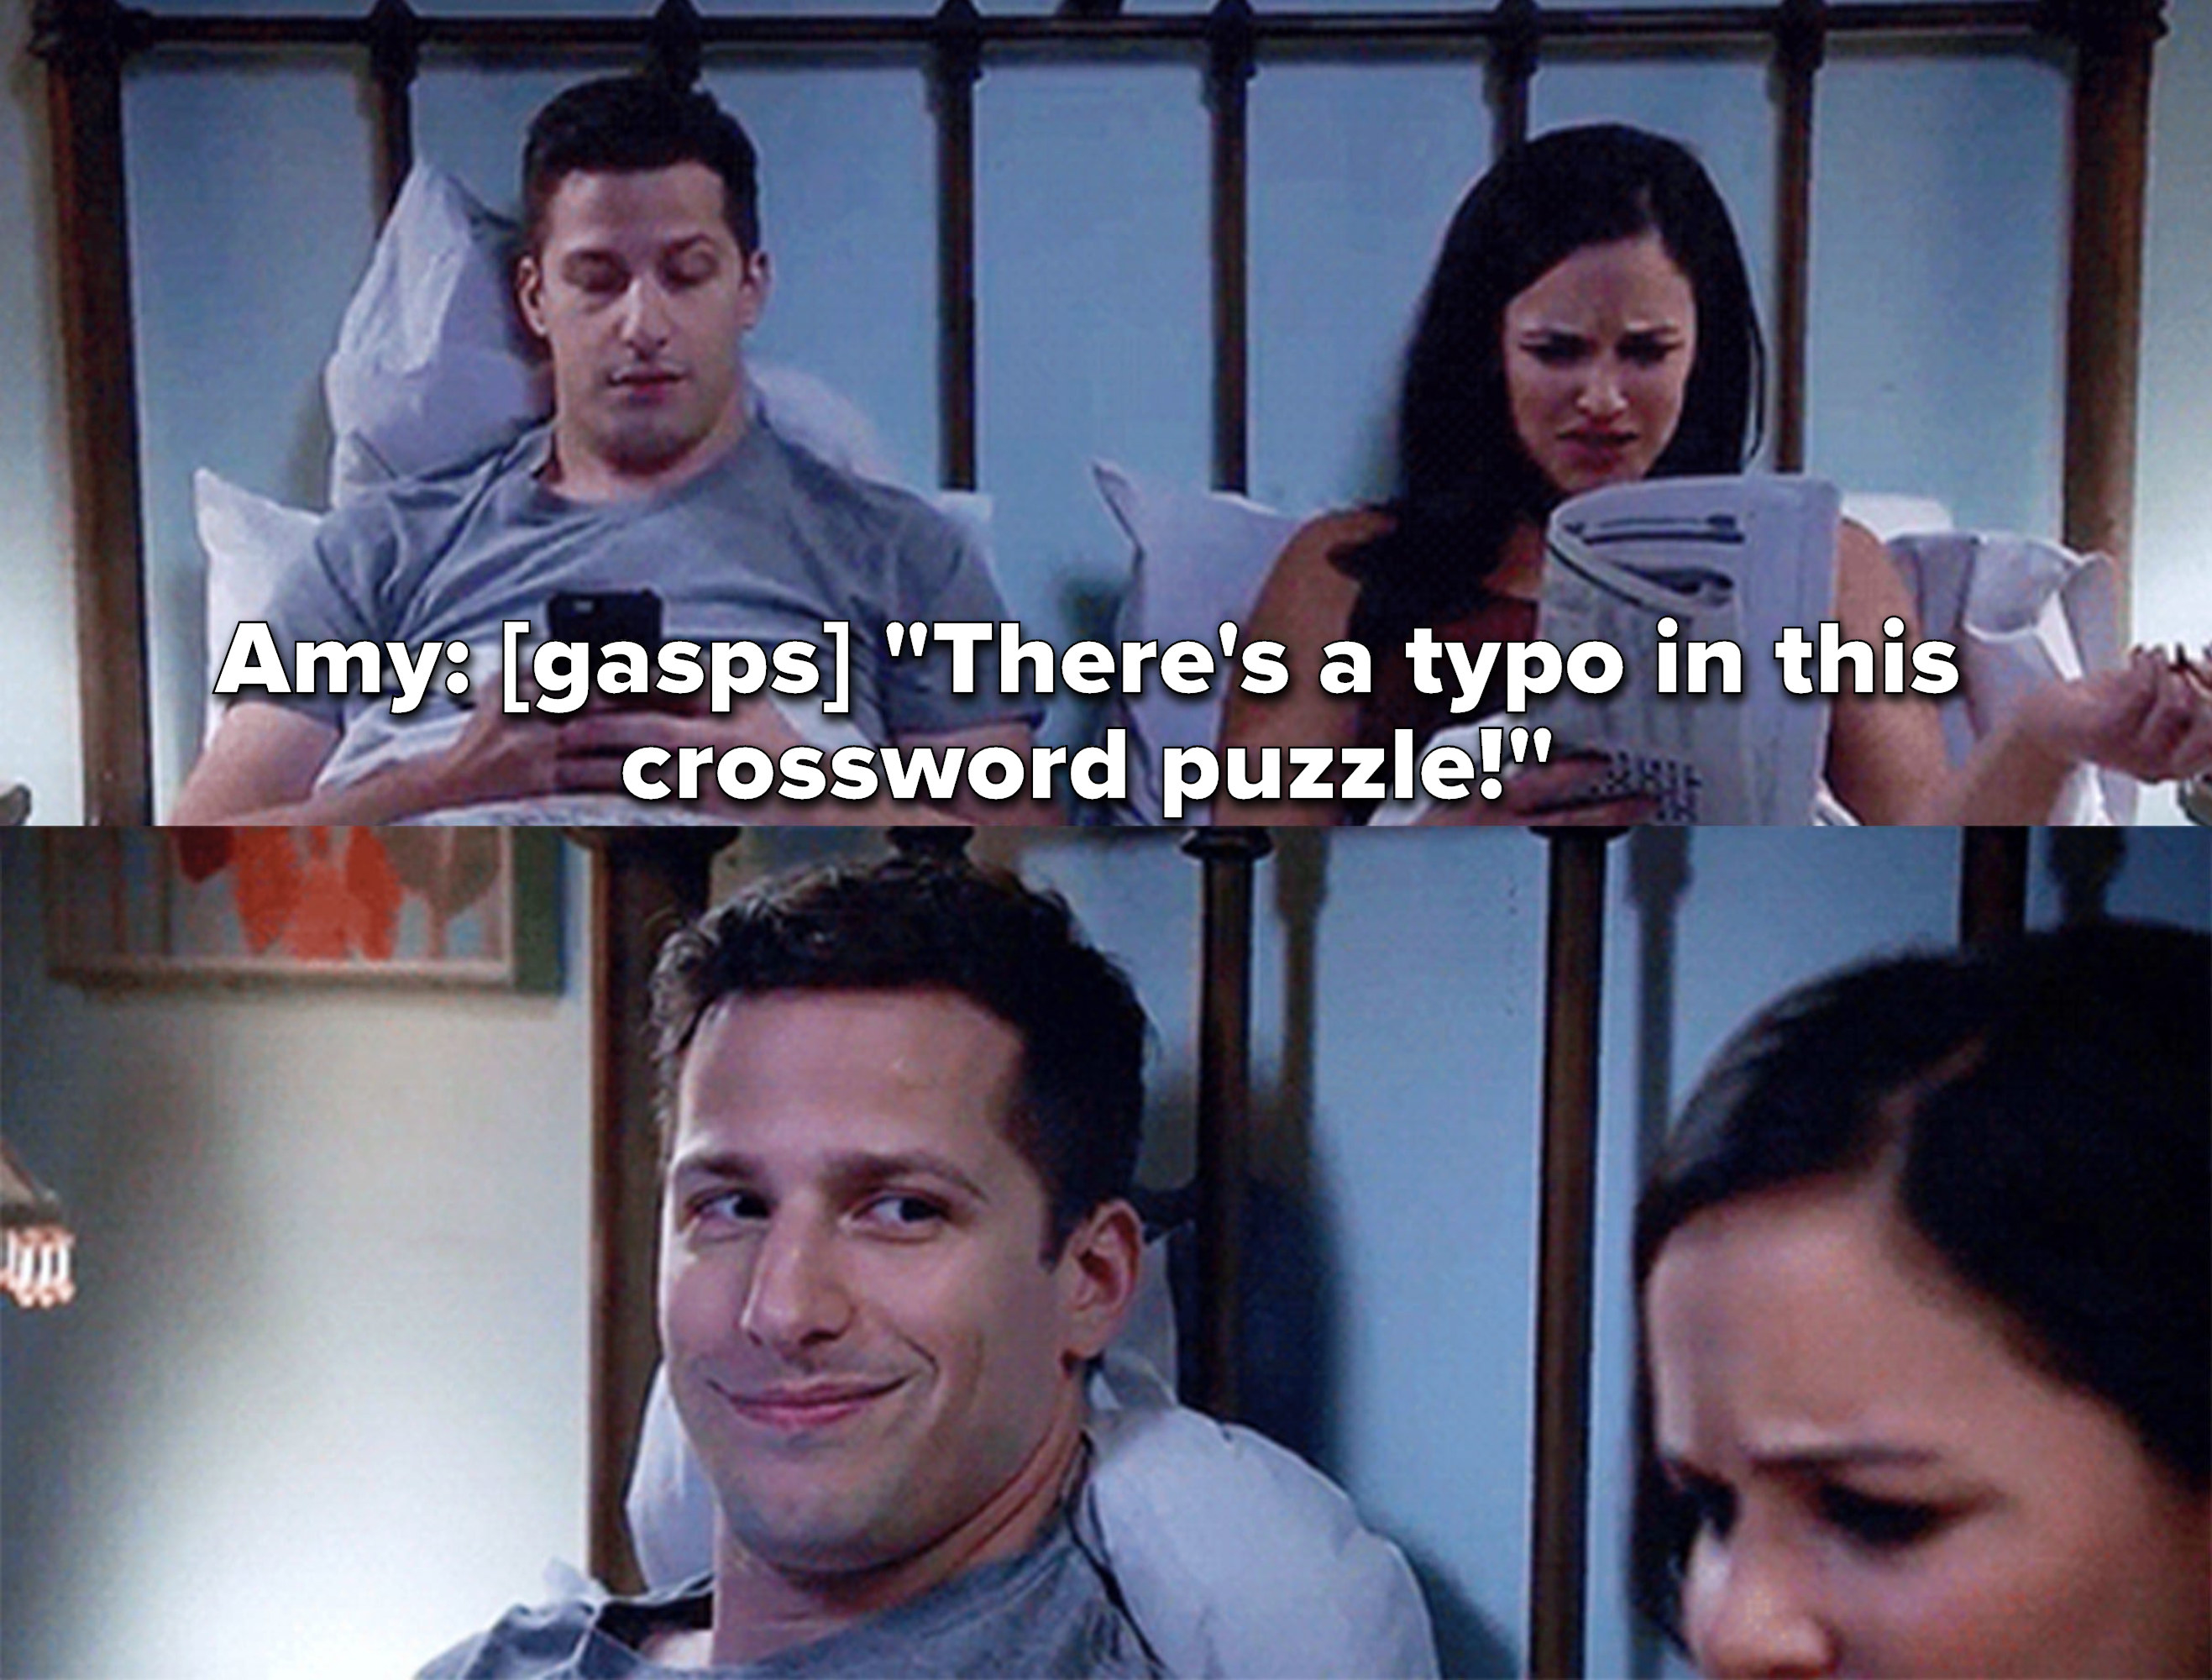 Amy gasps audibly about a typo in the crossword puzzle and Jake smiles at her